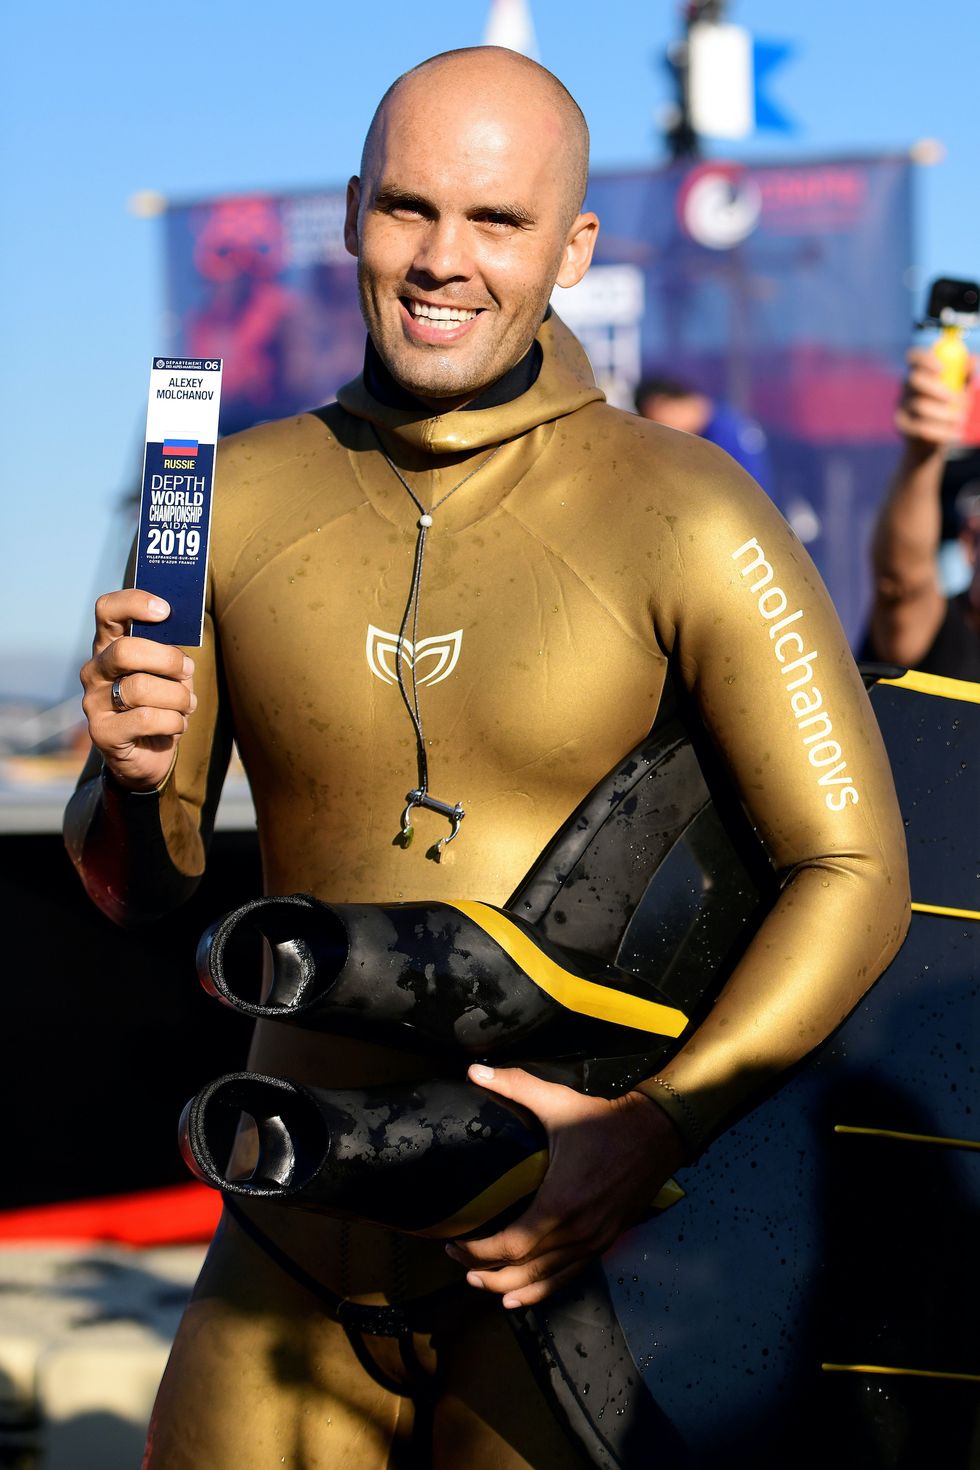 russia alexey molchanov  poses after succeeding in his 130 meter dive in the constant weight with fins cwt men category during the 2019 aida depth world freediving championship on september 13, 2019 in villefranche sur mer photo by yann coatsaliou  afp        photo credit should read yann coatsaliouafp via getty images